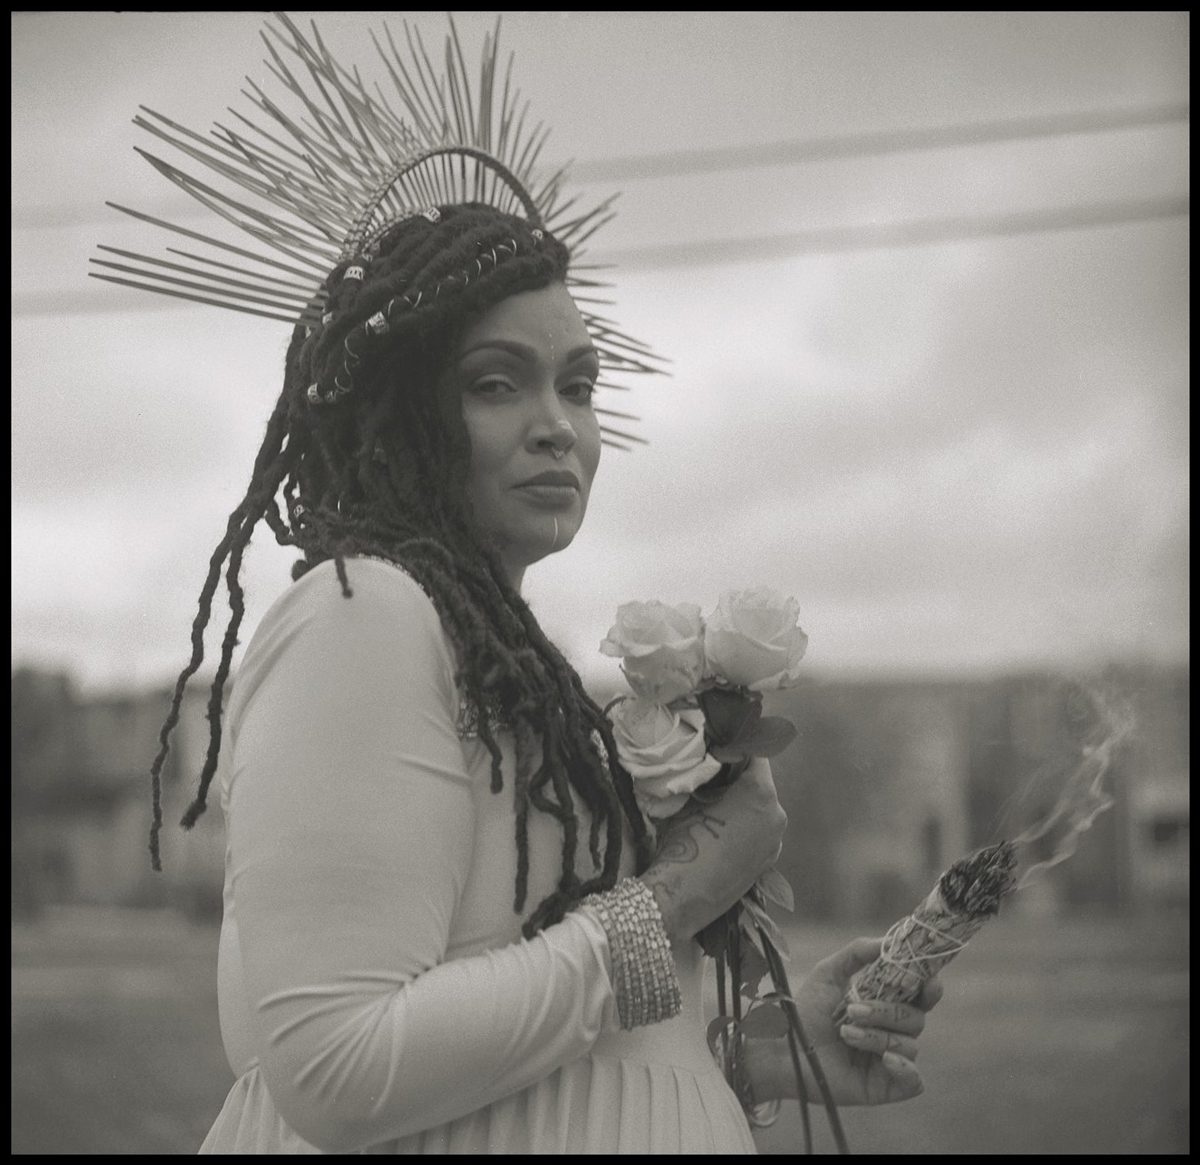 Black and white portrait of woman holding flowers with a headpiece